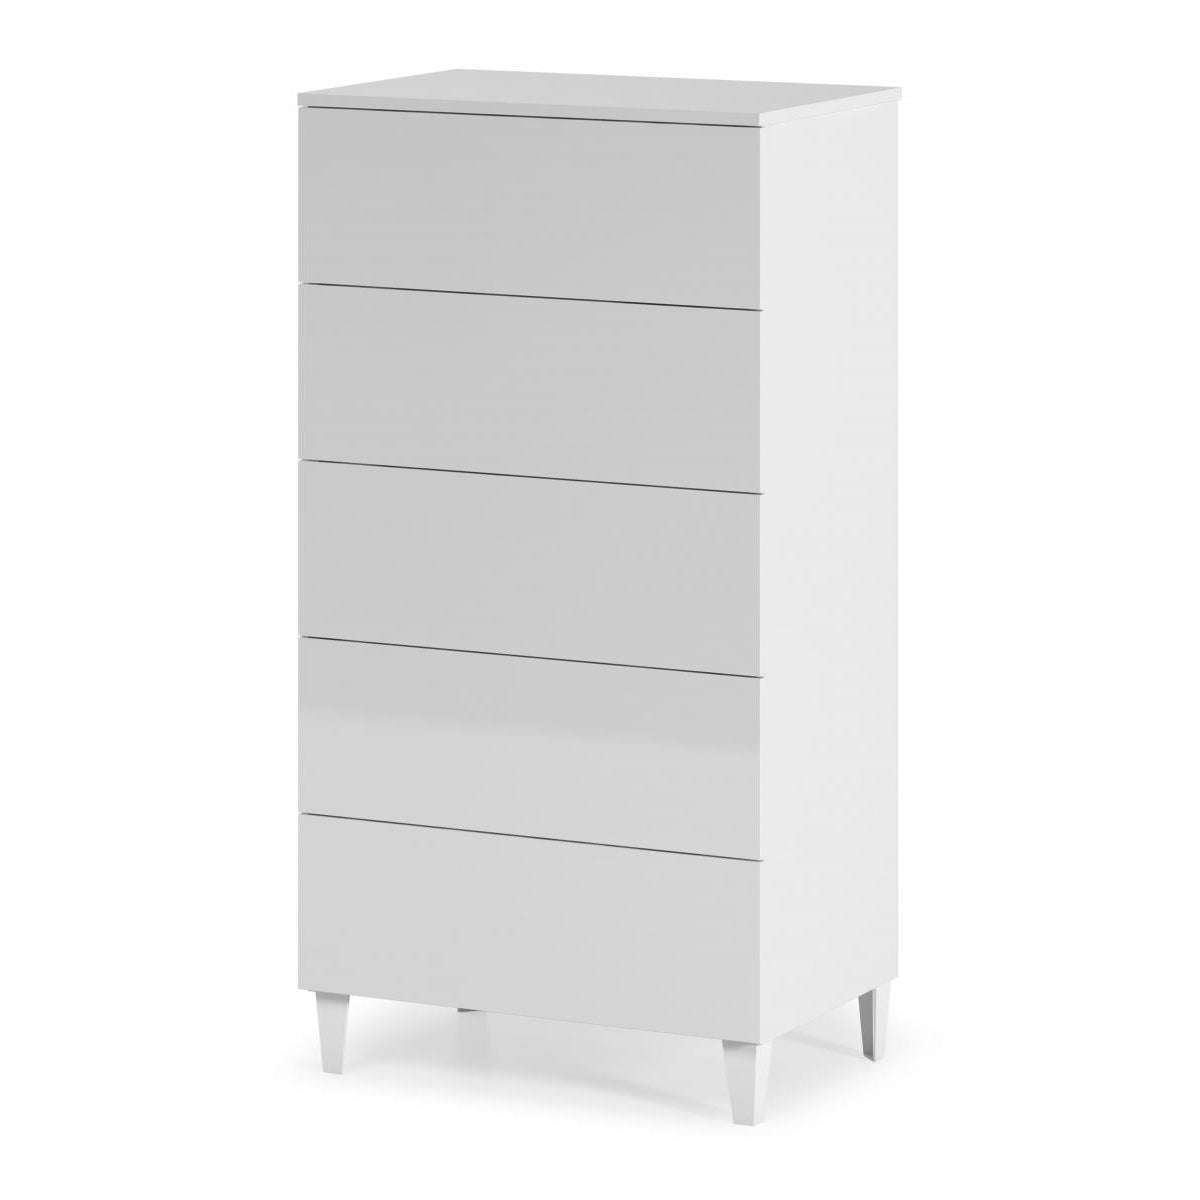 Ashpinoke:Arctic Chest 5 Drawer White 007835BO,Chests and Drawers,Heartlands Furniture